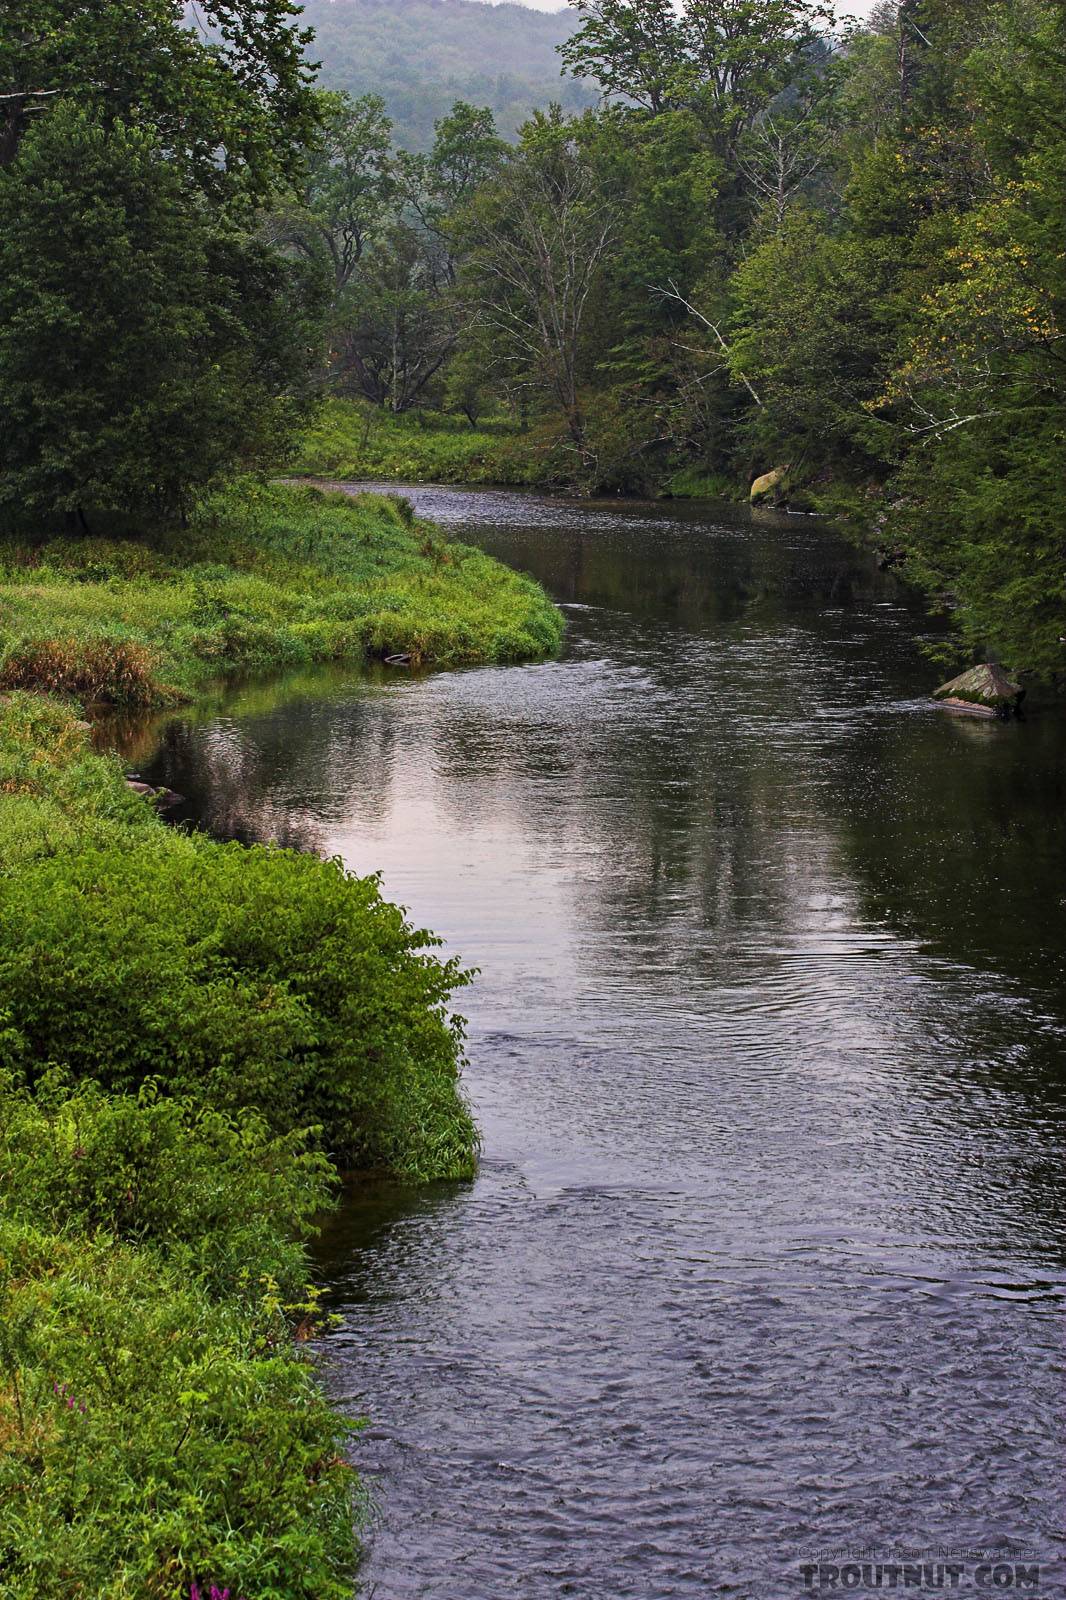  From the Neversink River in New York.